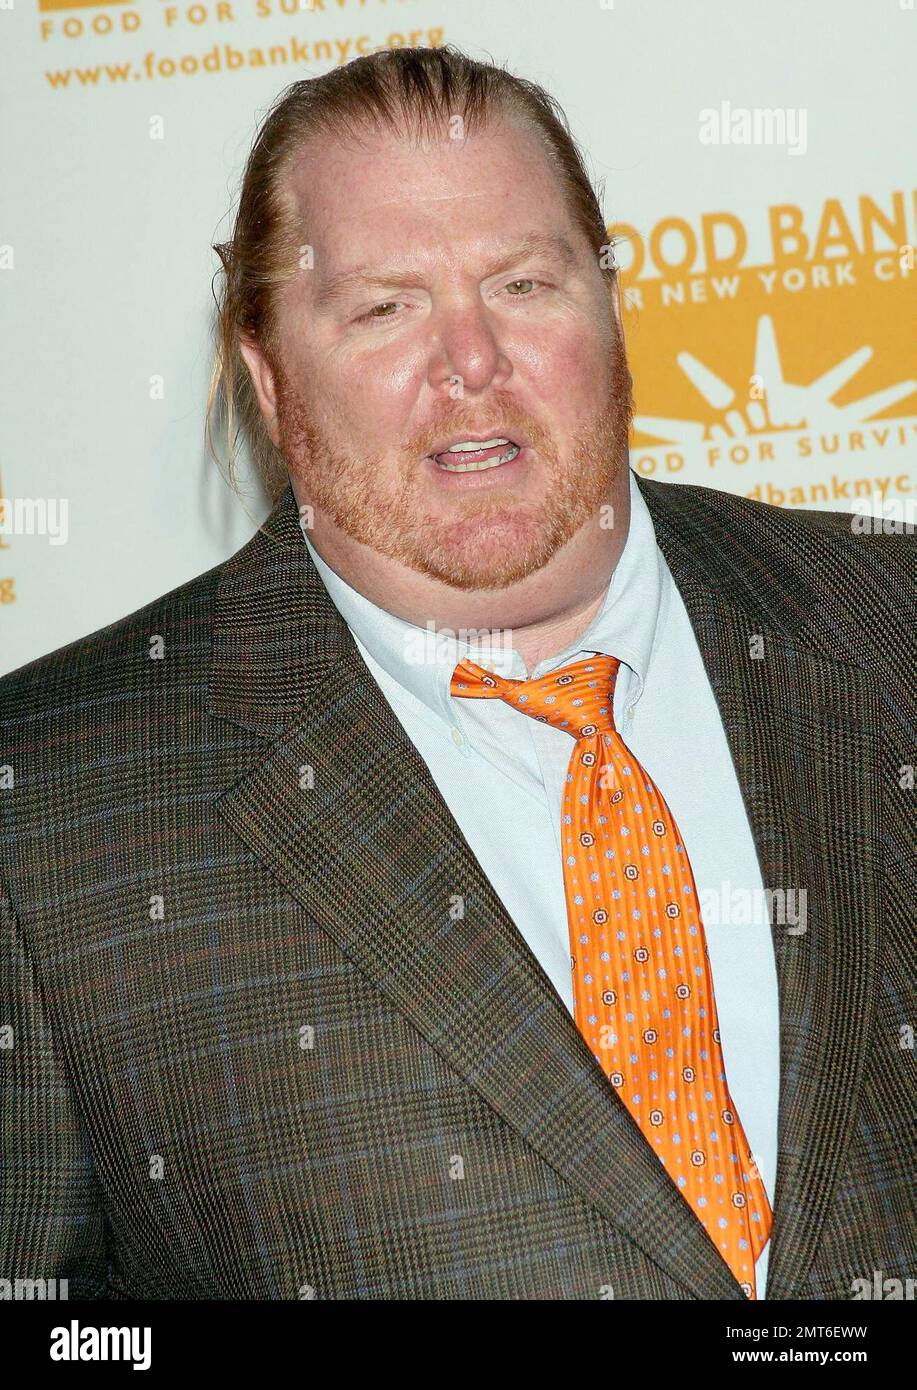 Chef Mario Batali at The Food Bank For New York City's 5th Annual Can-Do Awards dinner at Pier 60 in New York, NY. 4/7/08. Stock Photo